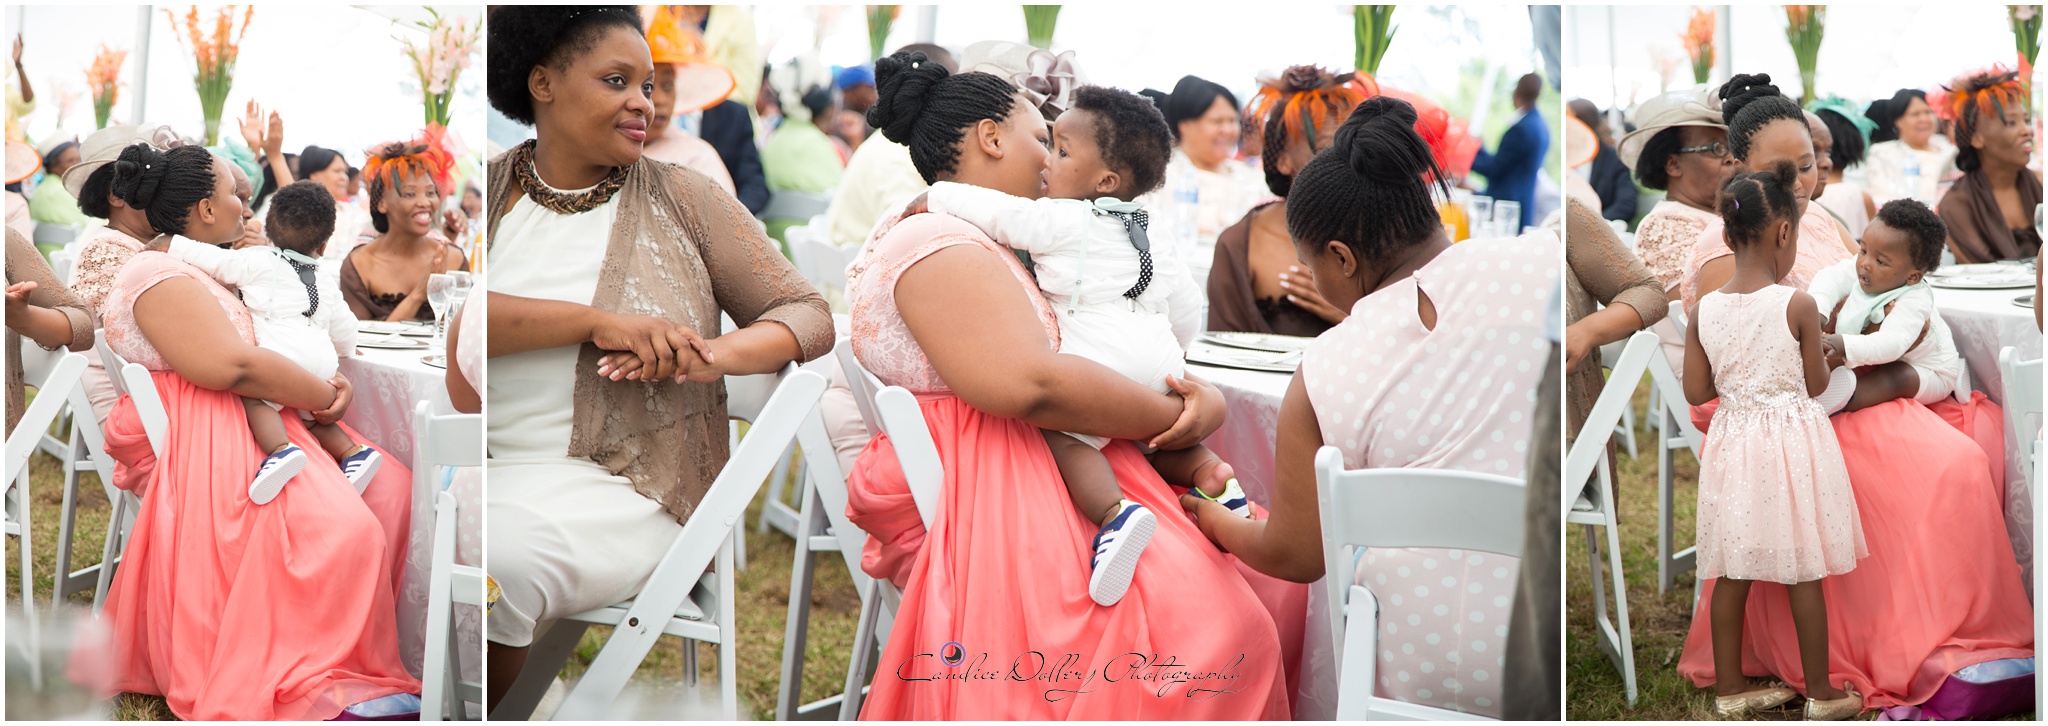 Thembi & Sabelo's Wedding - Candice Dollery Photography_8333